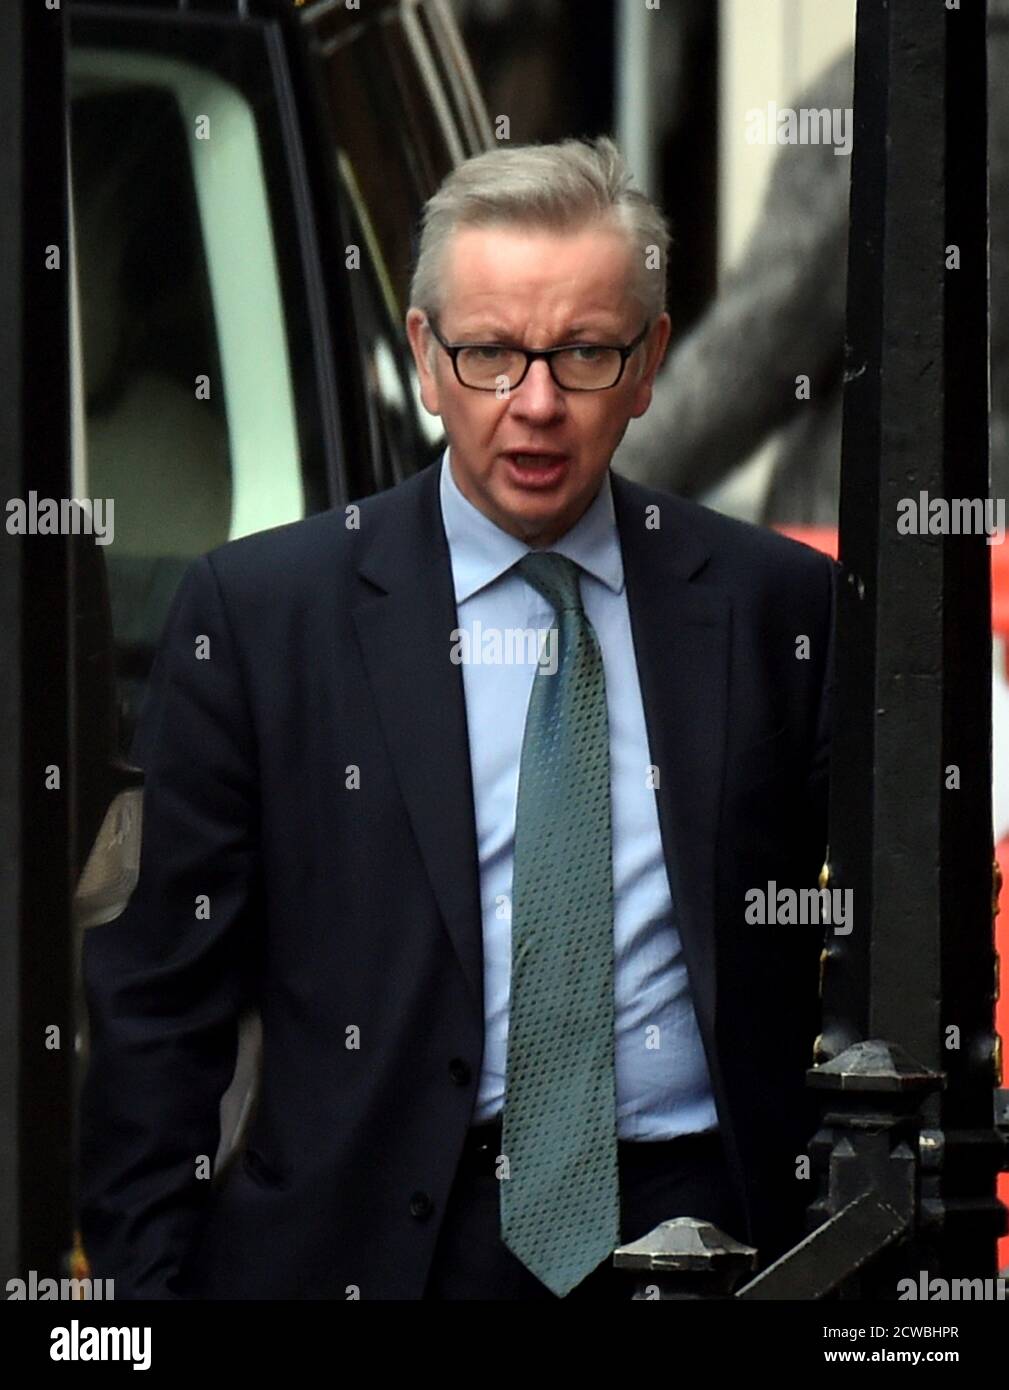 Photograph of Michael Gove. Michael Andrew Gove (1967-) a British Conservative politician who has been Chancellor of the Duchy of Lancaster since July 2019. He has been the Member of Parliament for Surrey Heath since 2005. He was appointed to the Shadow Cabinet by David Cameron in 2007 as Shadow Secretary of State for Children, Schools and Families. Stock Photo